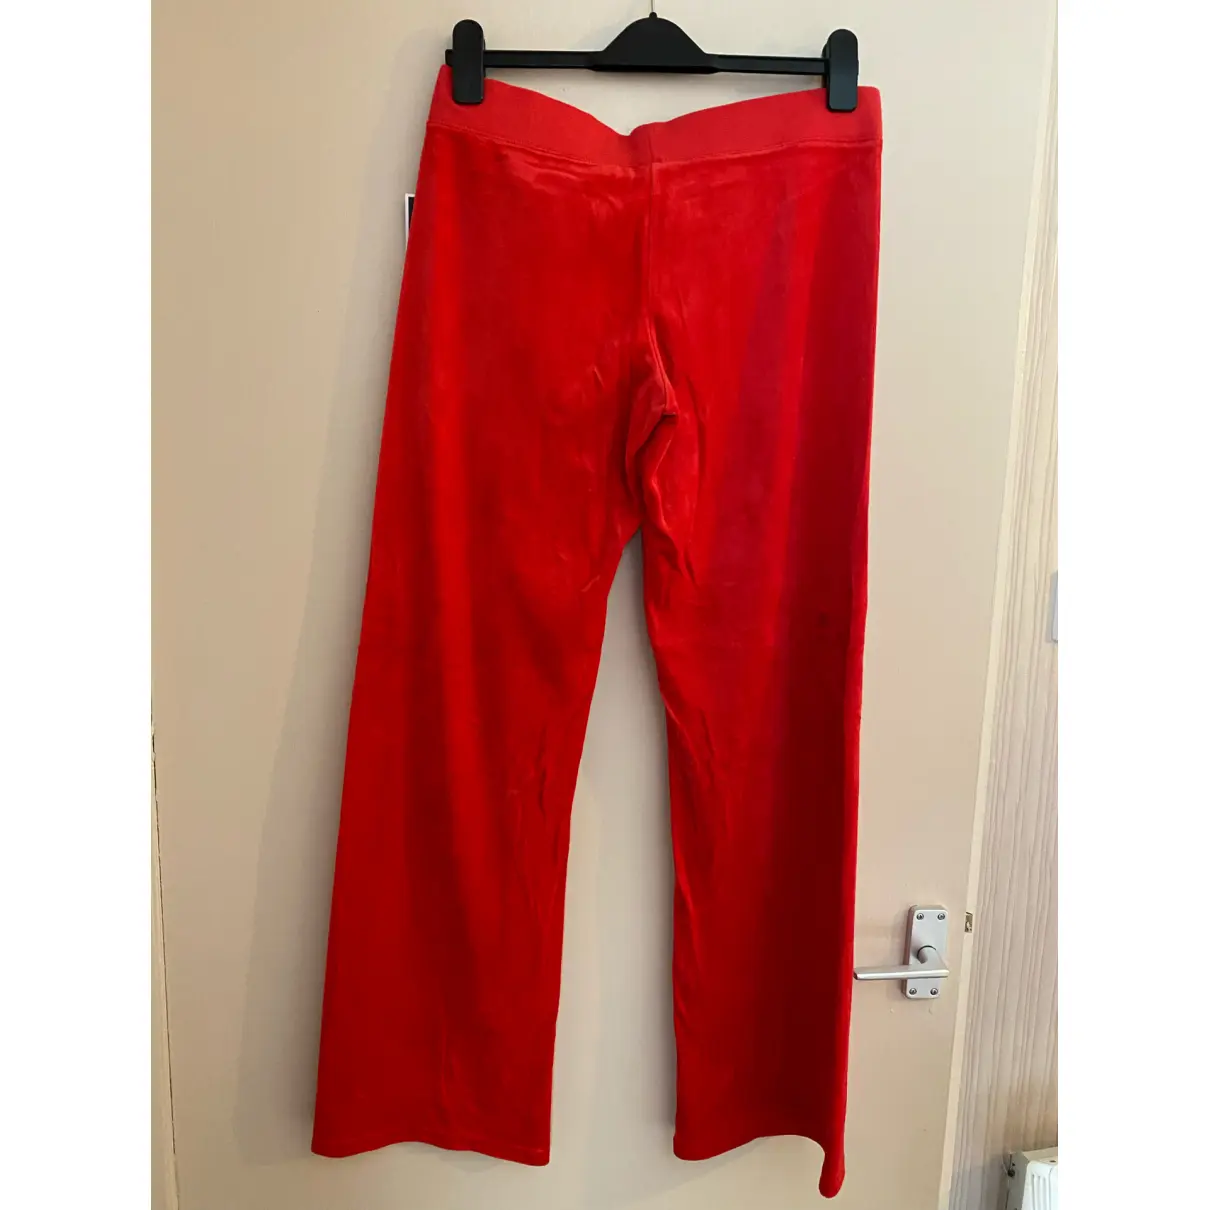 Buy Juicy Couture Trousers online